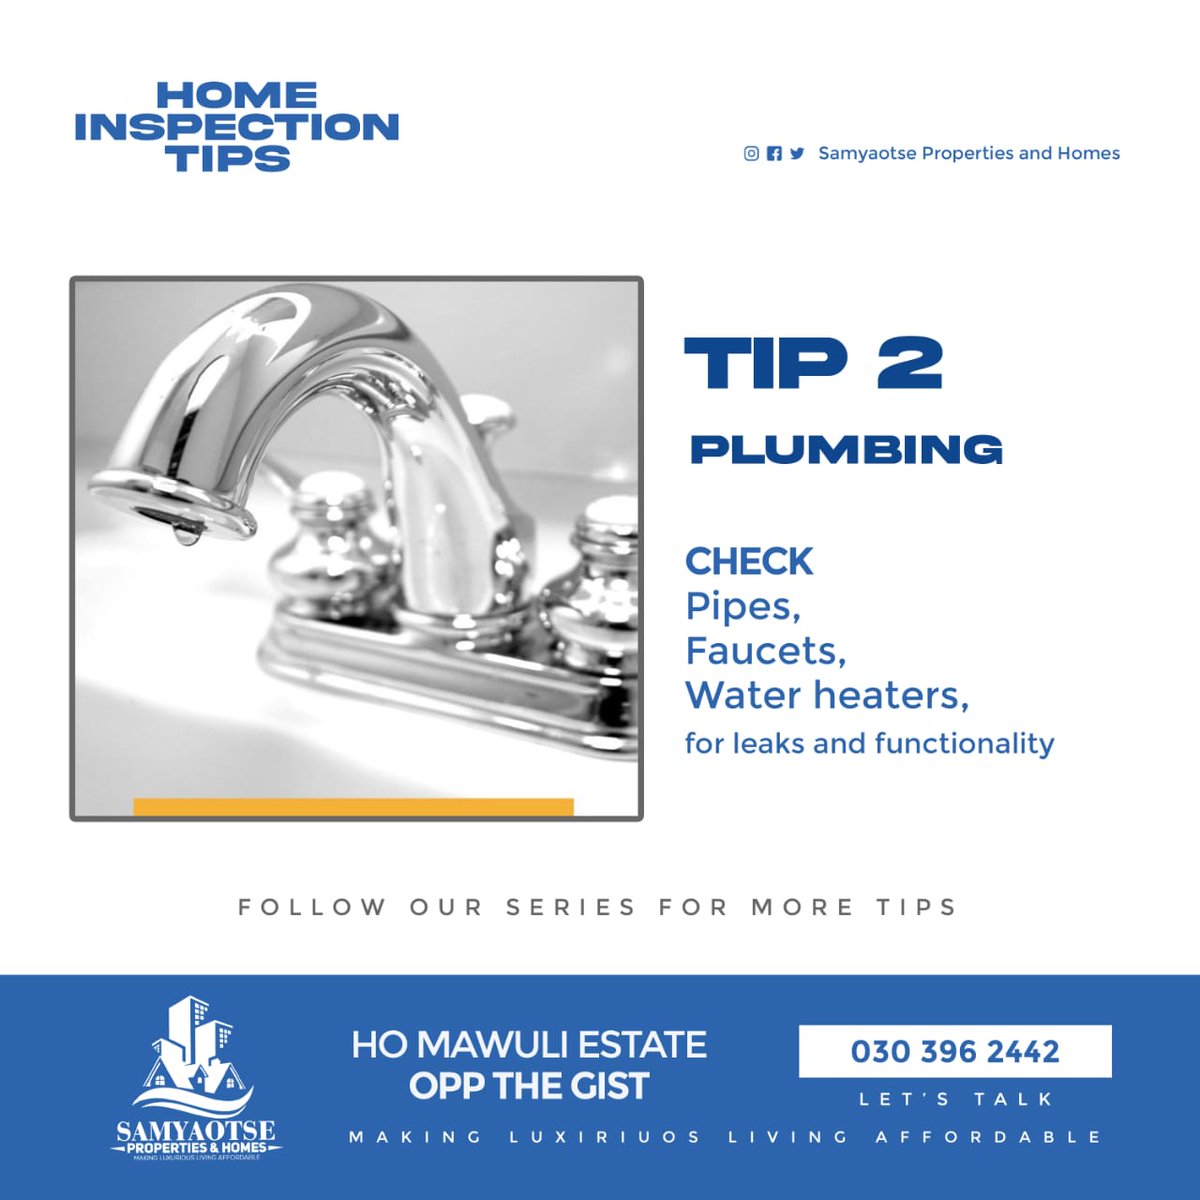 Our Home Inspection Tips for the Day. 
🏡PLUMBING
Check Pipes, Faucets, Water Heaters for leaks and functionality. 

#samyaotsepropertiesandhomes #SPH 
#samyaotseho #horealestate #realestate #houseforsale